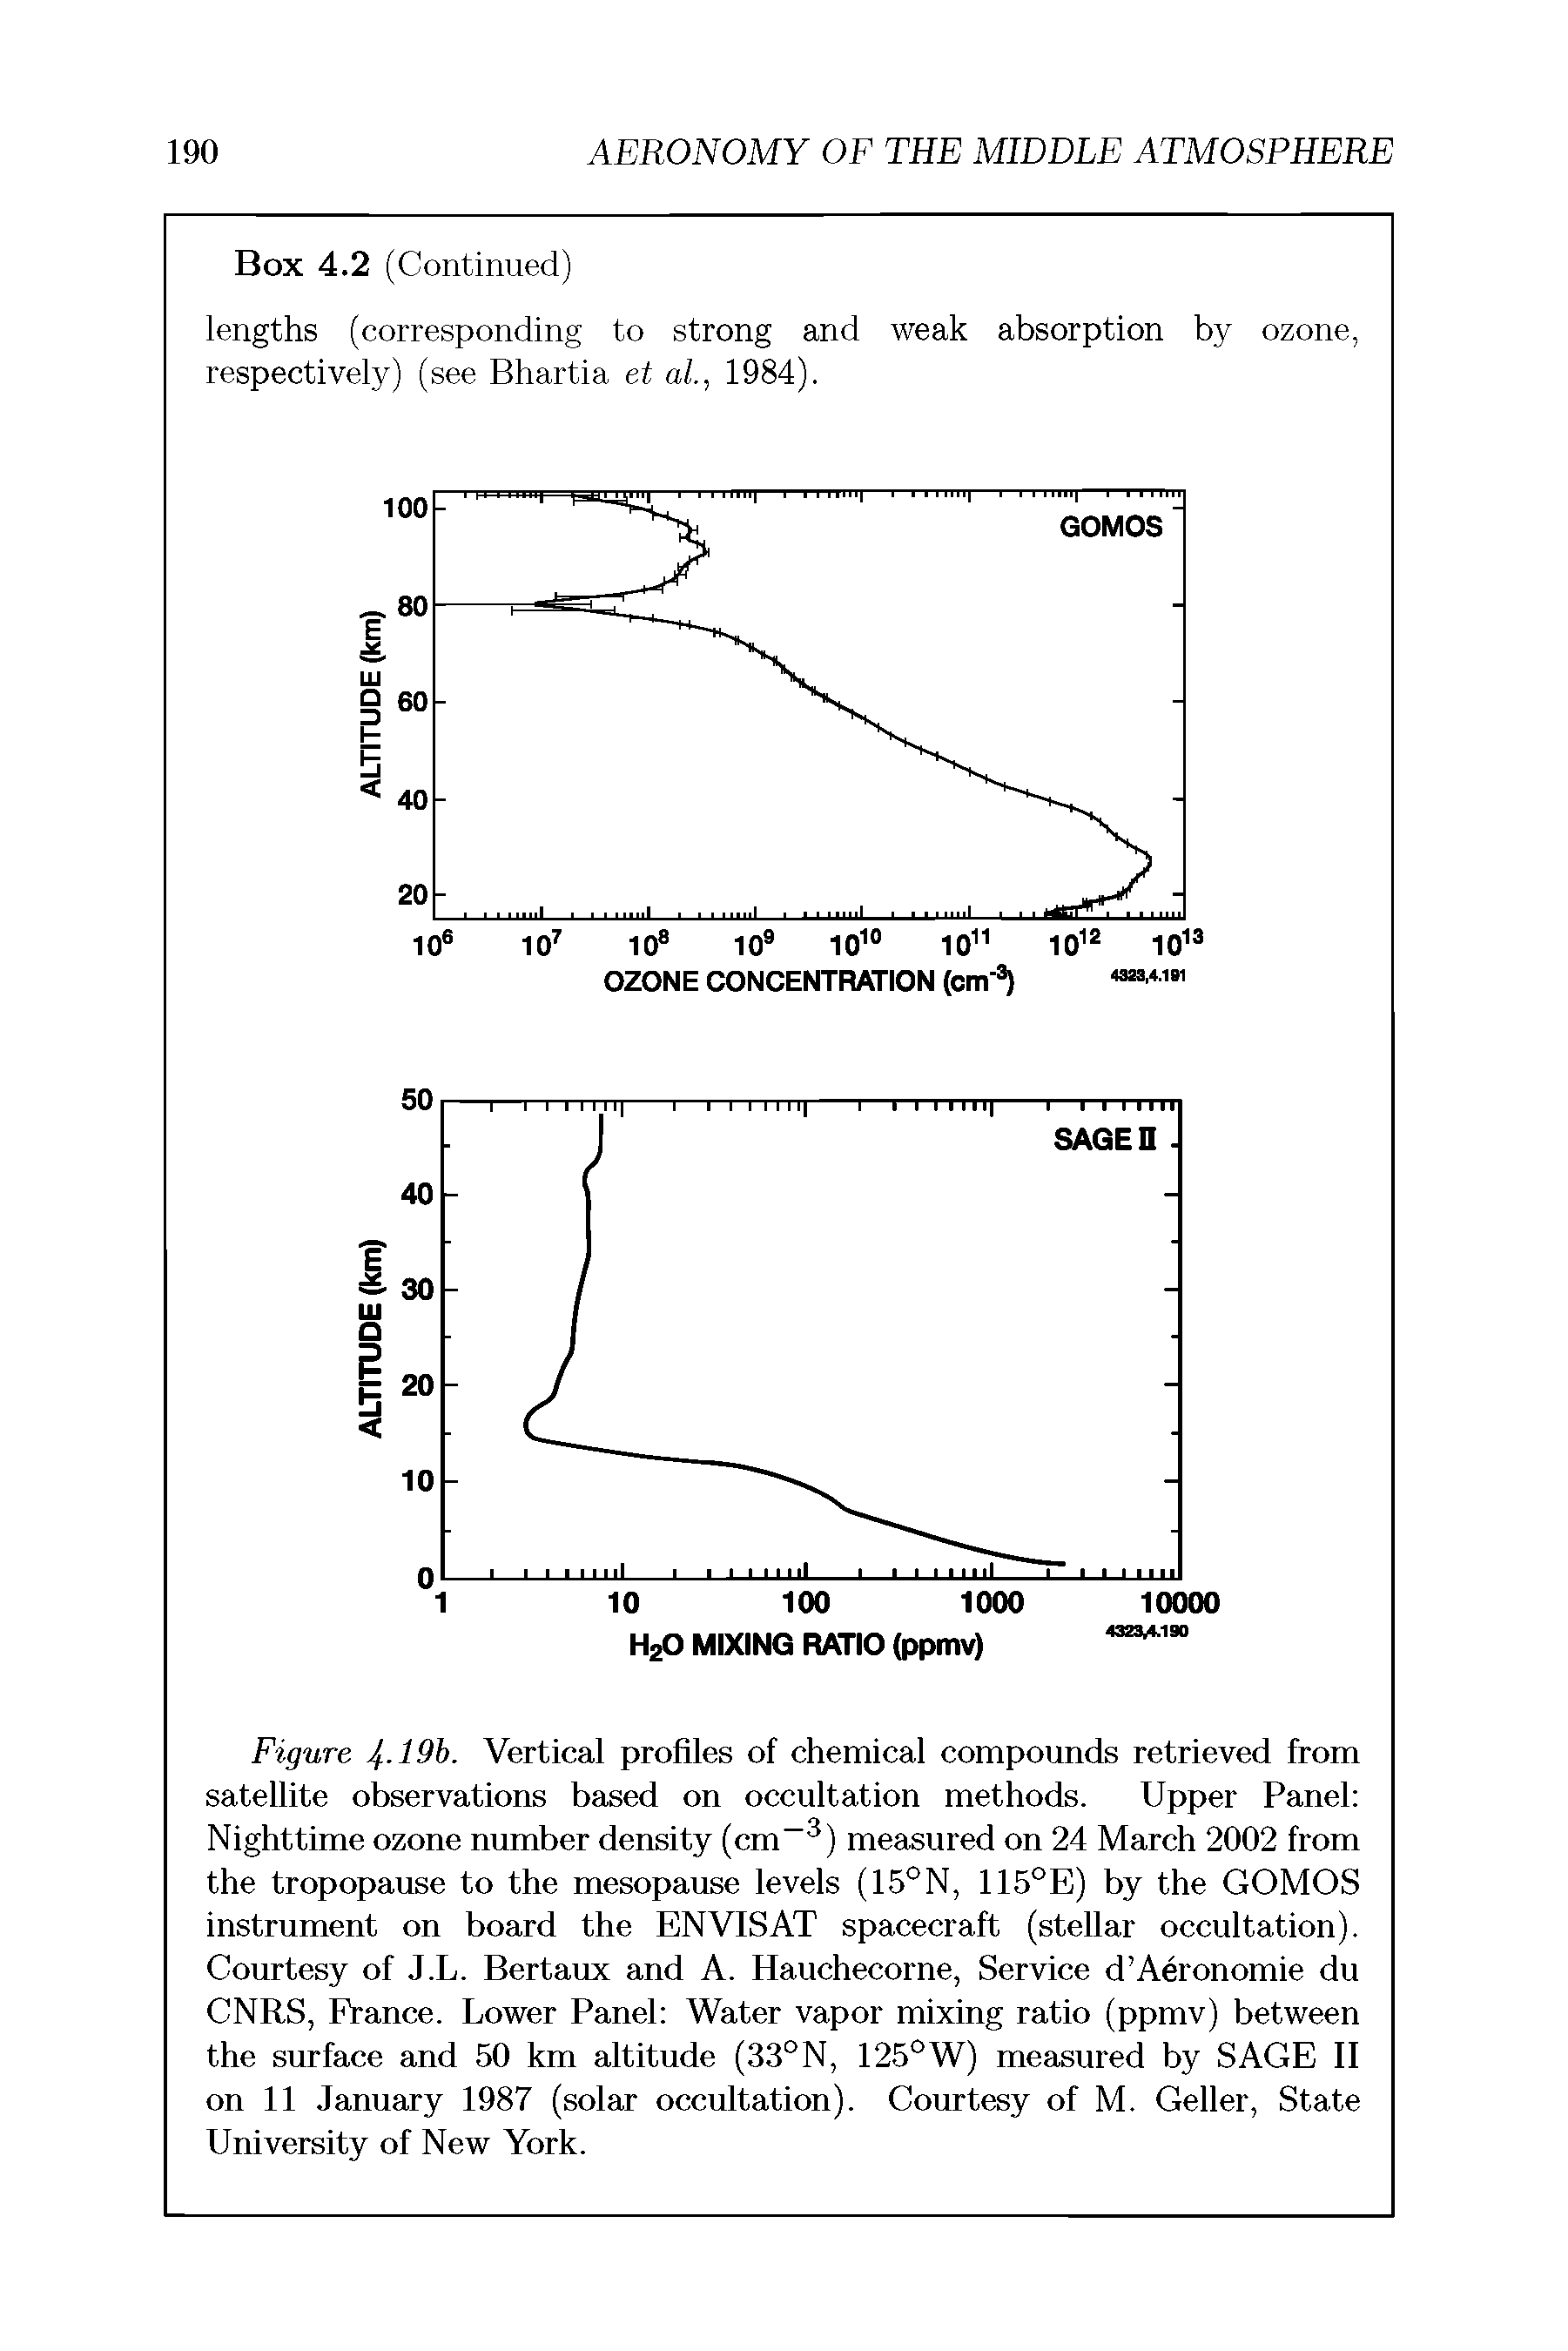 Figure 4-19b. Vertical profiles of chemical compounds retrieved from satellite observations based on occultation methods. Upper Panel Nighttime ozone number density (cm-3) measured on 24 March 2002 from the tropopause to the mesopause levels (15°N, 115°E) by the GOMOS instrument on board the ENVISAT spacecraft (stellar occultation). Courtesy of J.L. Bertaux and A. Hauchecorne, Service d Aeronomie du CNRS, France. Lower Panel Water vapor mixing ratio (ppmv) between the surface and 50 km altitude (33°N, 125°W) measured by SAGE II on 11 January 1987 (solar occultation). Courtesy of M. Geller, State University of New York.